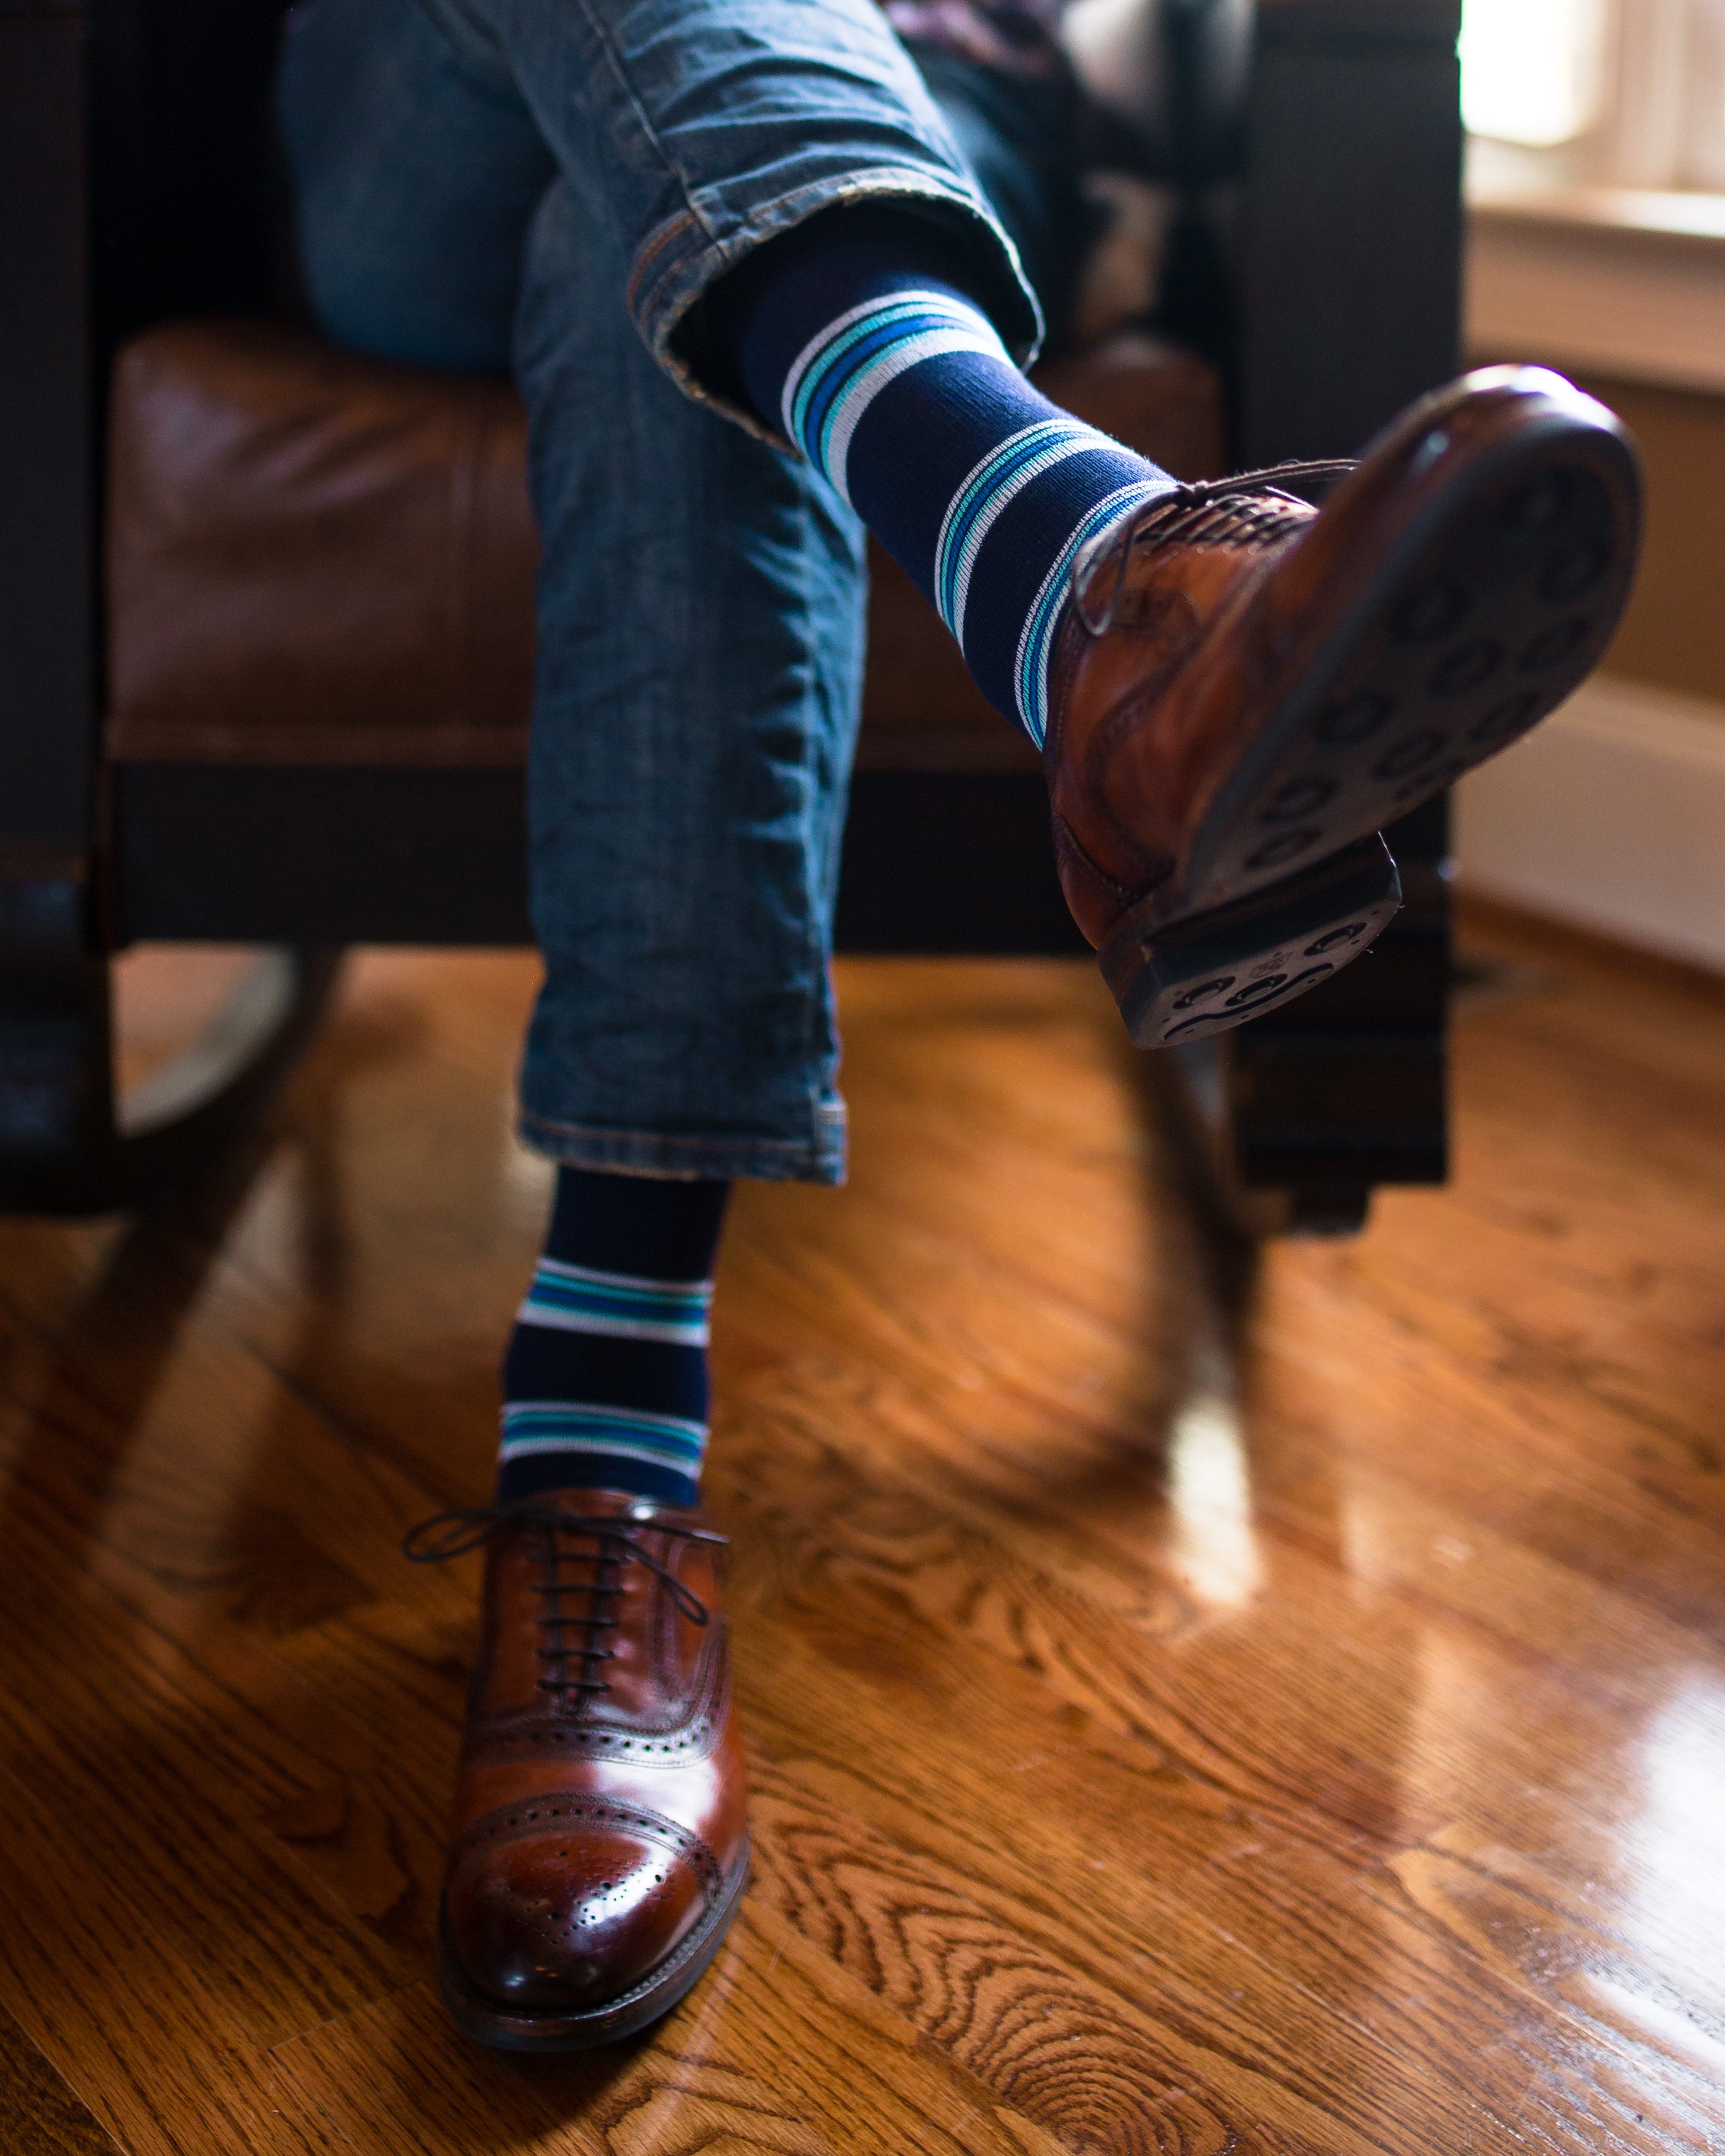 navy blue over the calf dress socks with light blue light pink and blue stripes, blue jeans, brown dress shoes